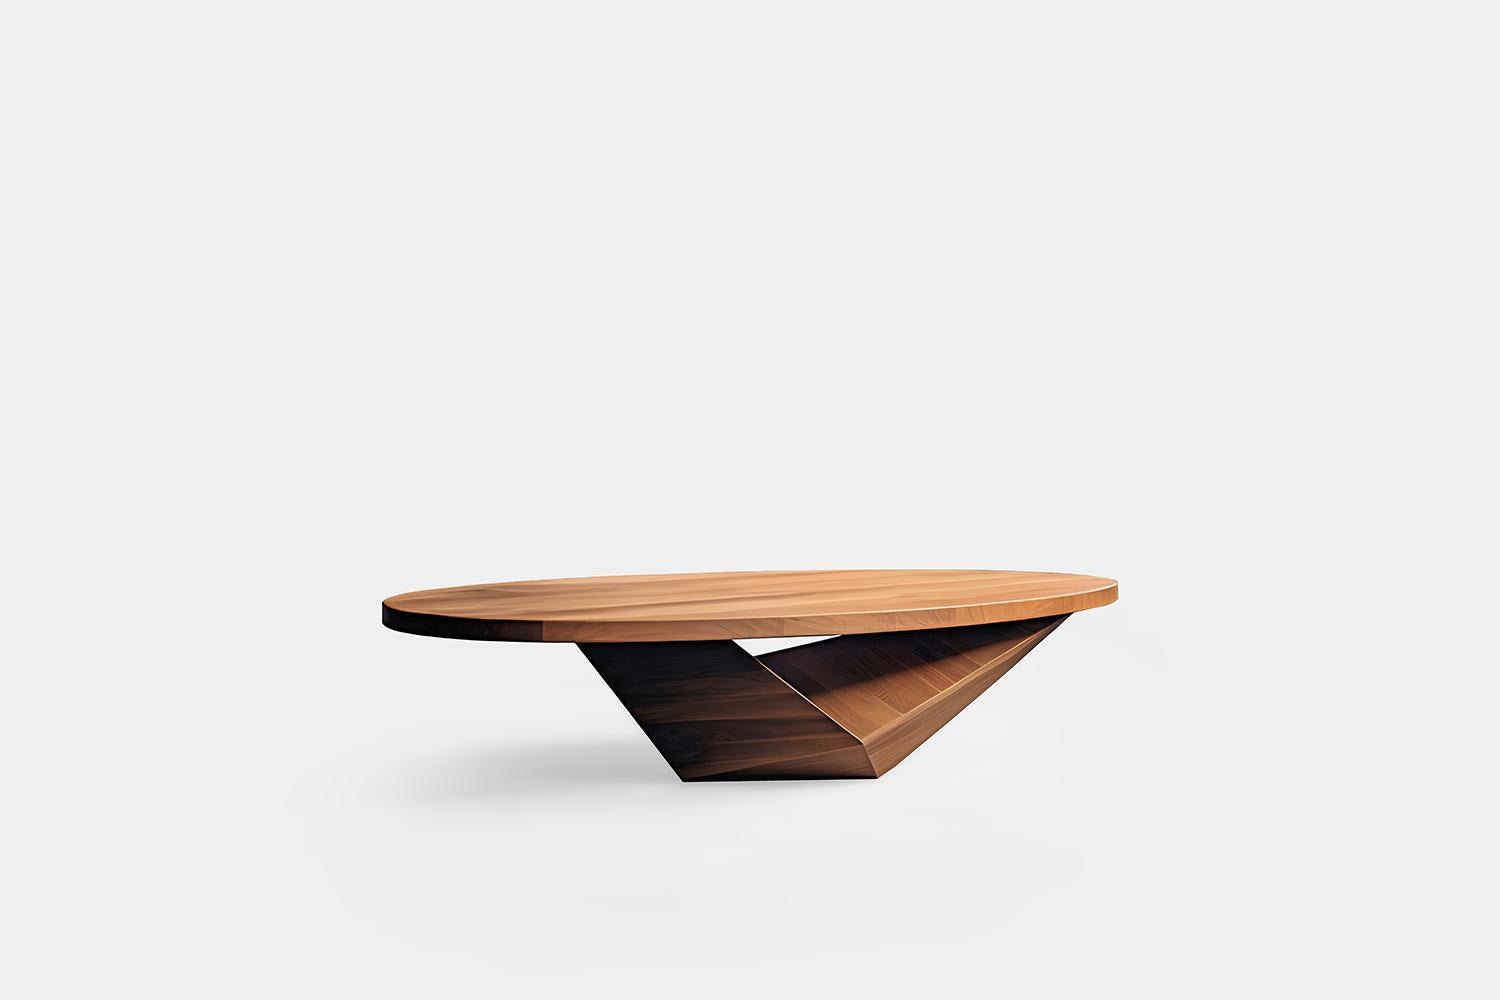 Mexican Solace 15: Elegant Solid Wood Coffee Table with Orthogonal Lines For Sale